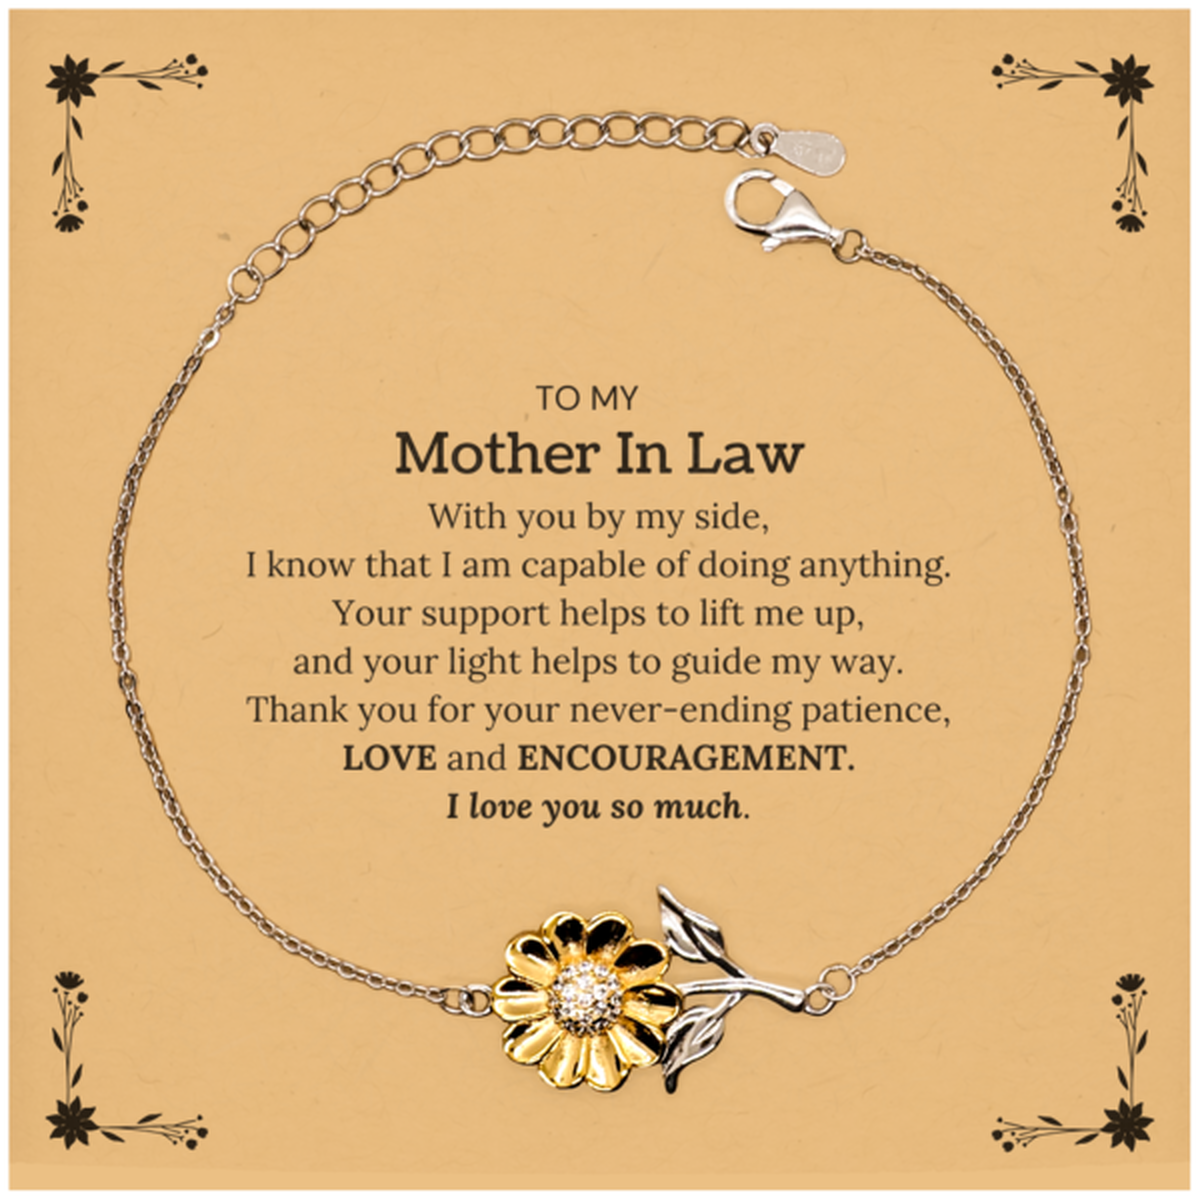 Appreciation Mother In Law Sunflower Bracelet Gifts, To My Mother In Law Birthday Christmas Wedding Keepsake Gifts for Mother In Law With you by my side, I know that I am capable of doing anything. I love you so much